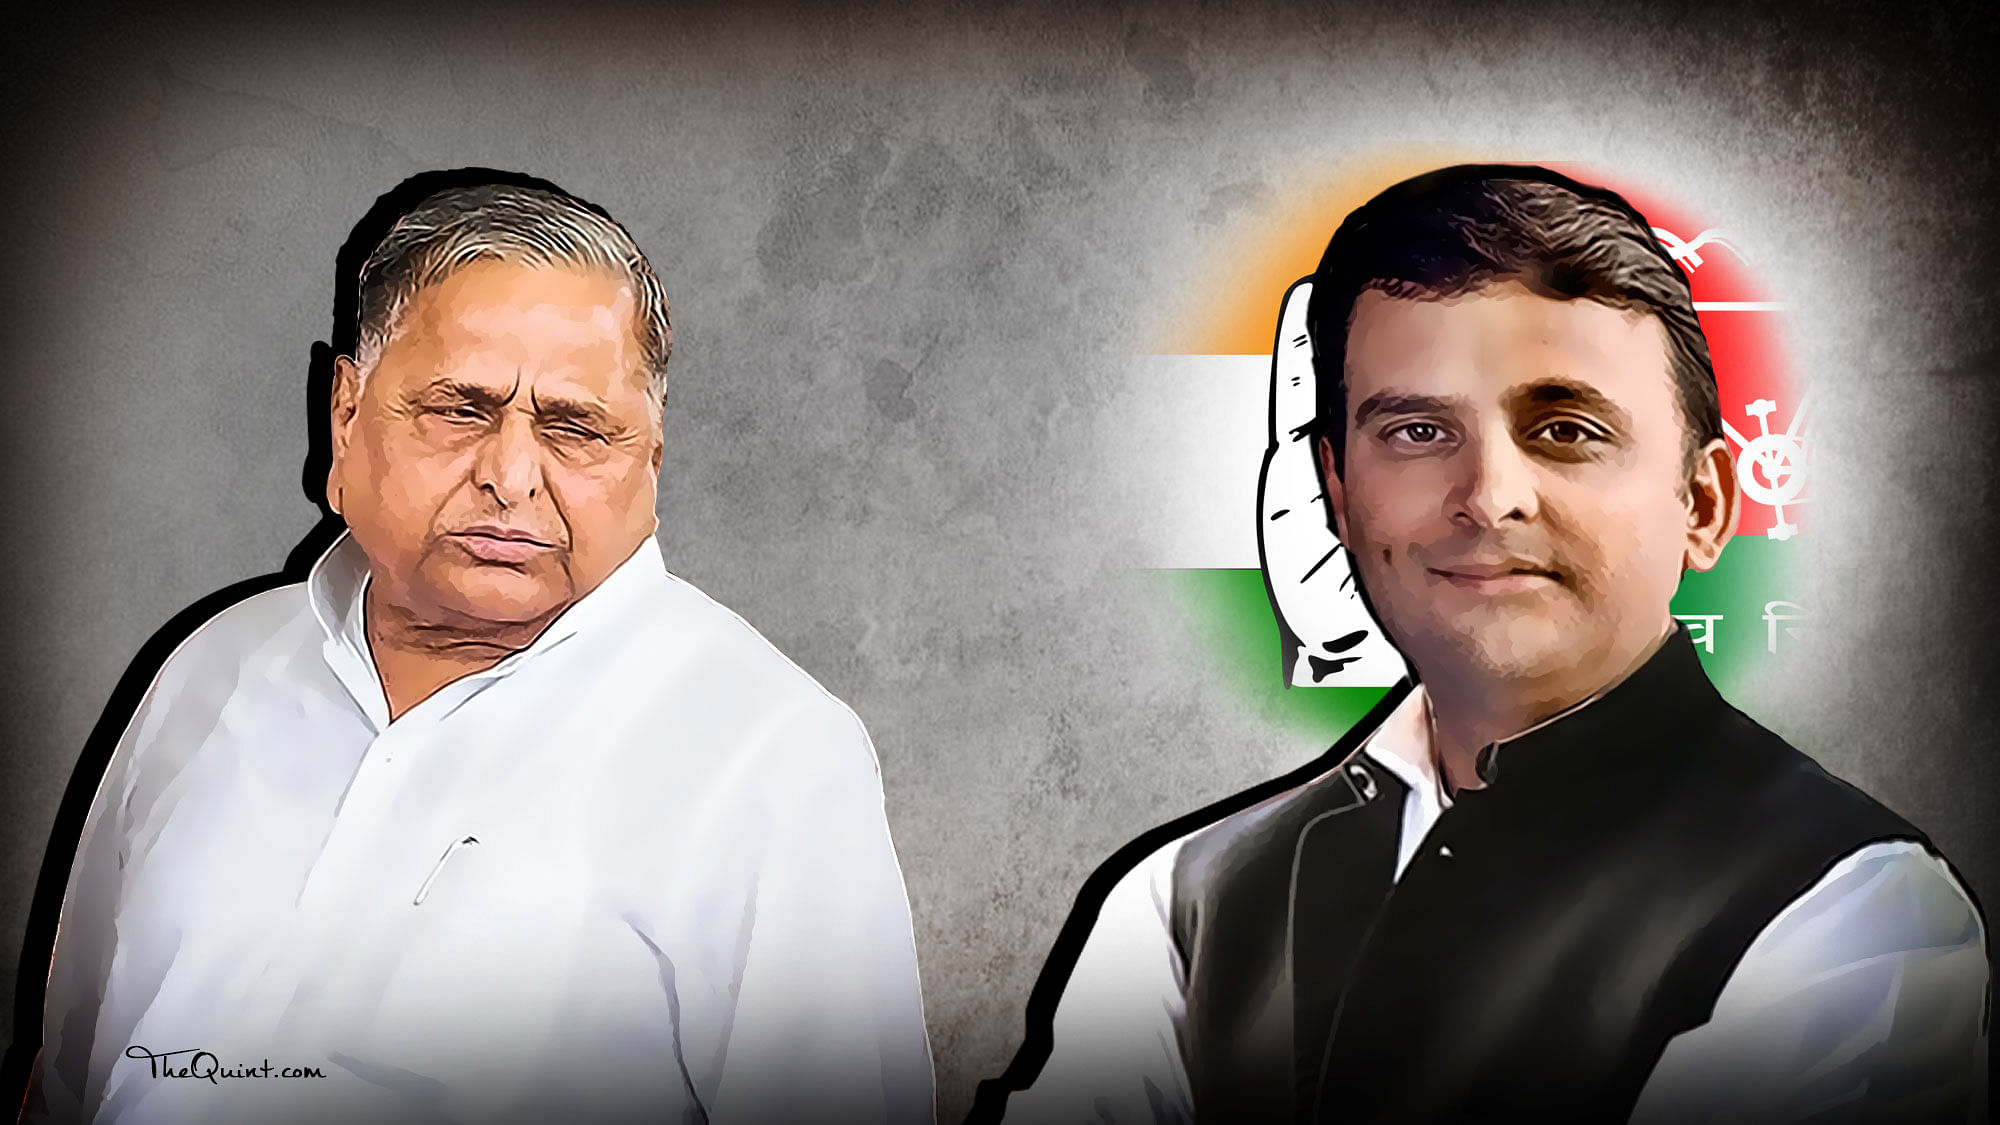 The Samajwadi Party (SP) will soon announce its alliance with the Congress. (Photo: <b>The Quint</b>)